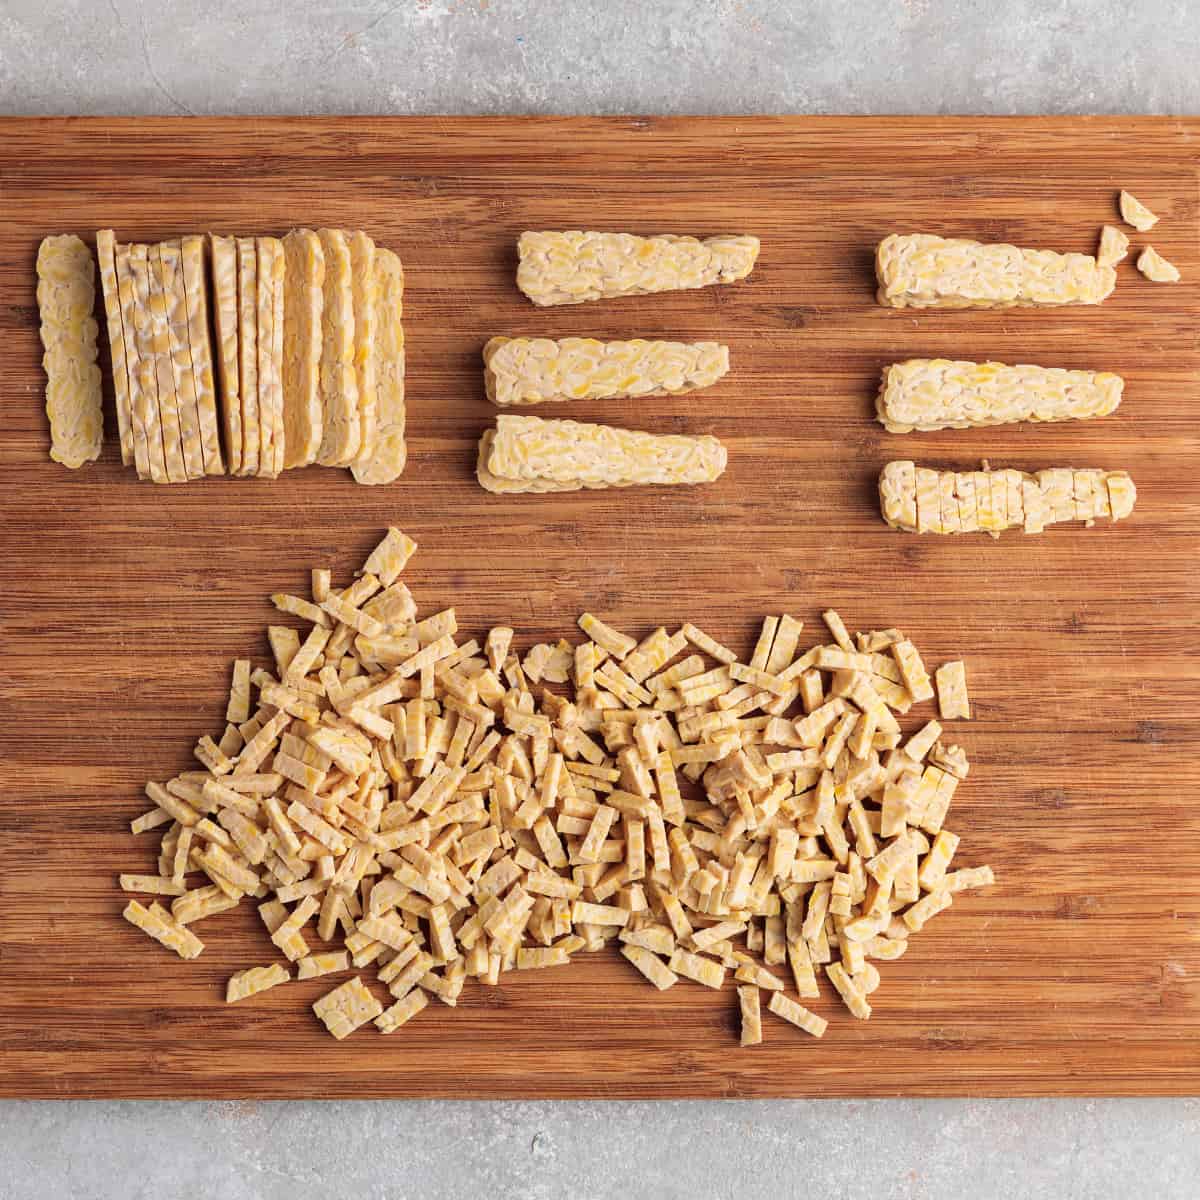 slices of tempeh on a wooden cutting board with some pieces cut into matchsticks. 